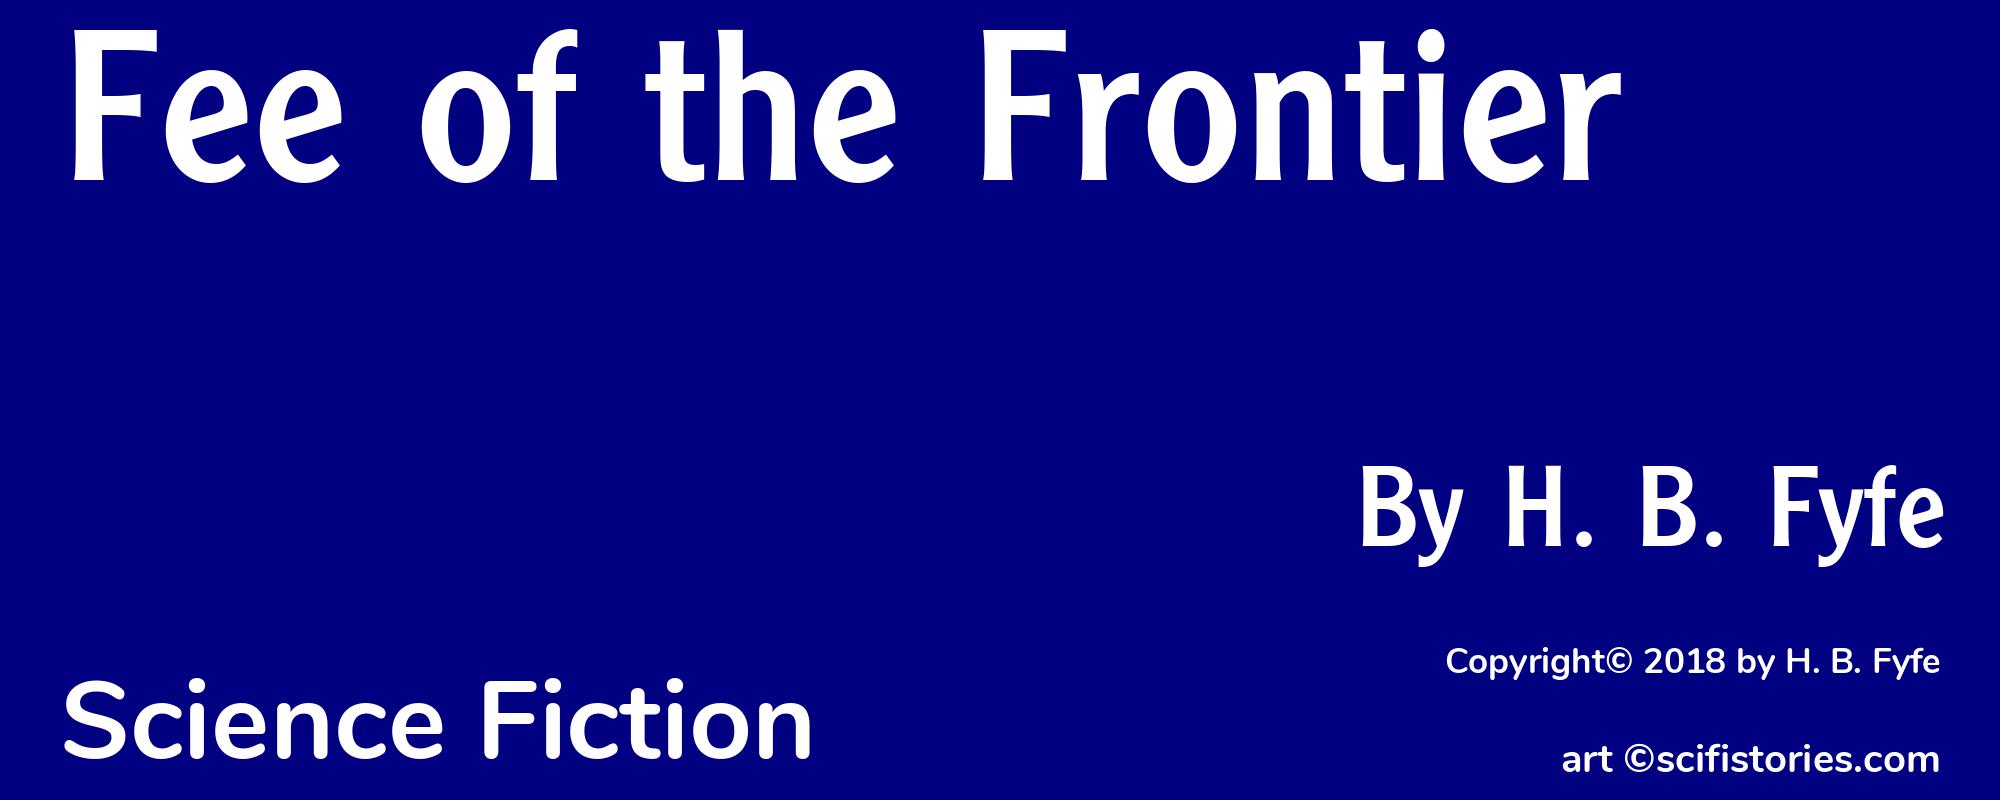 Fee of the Frontier - Cover